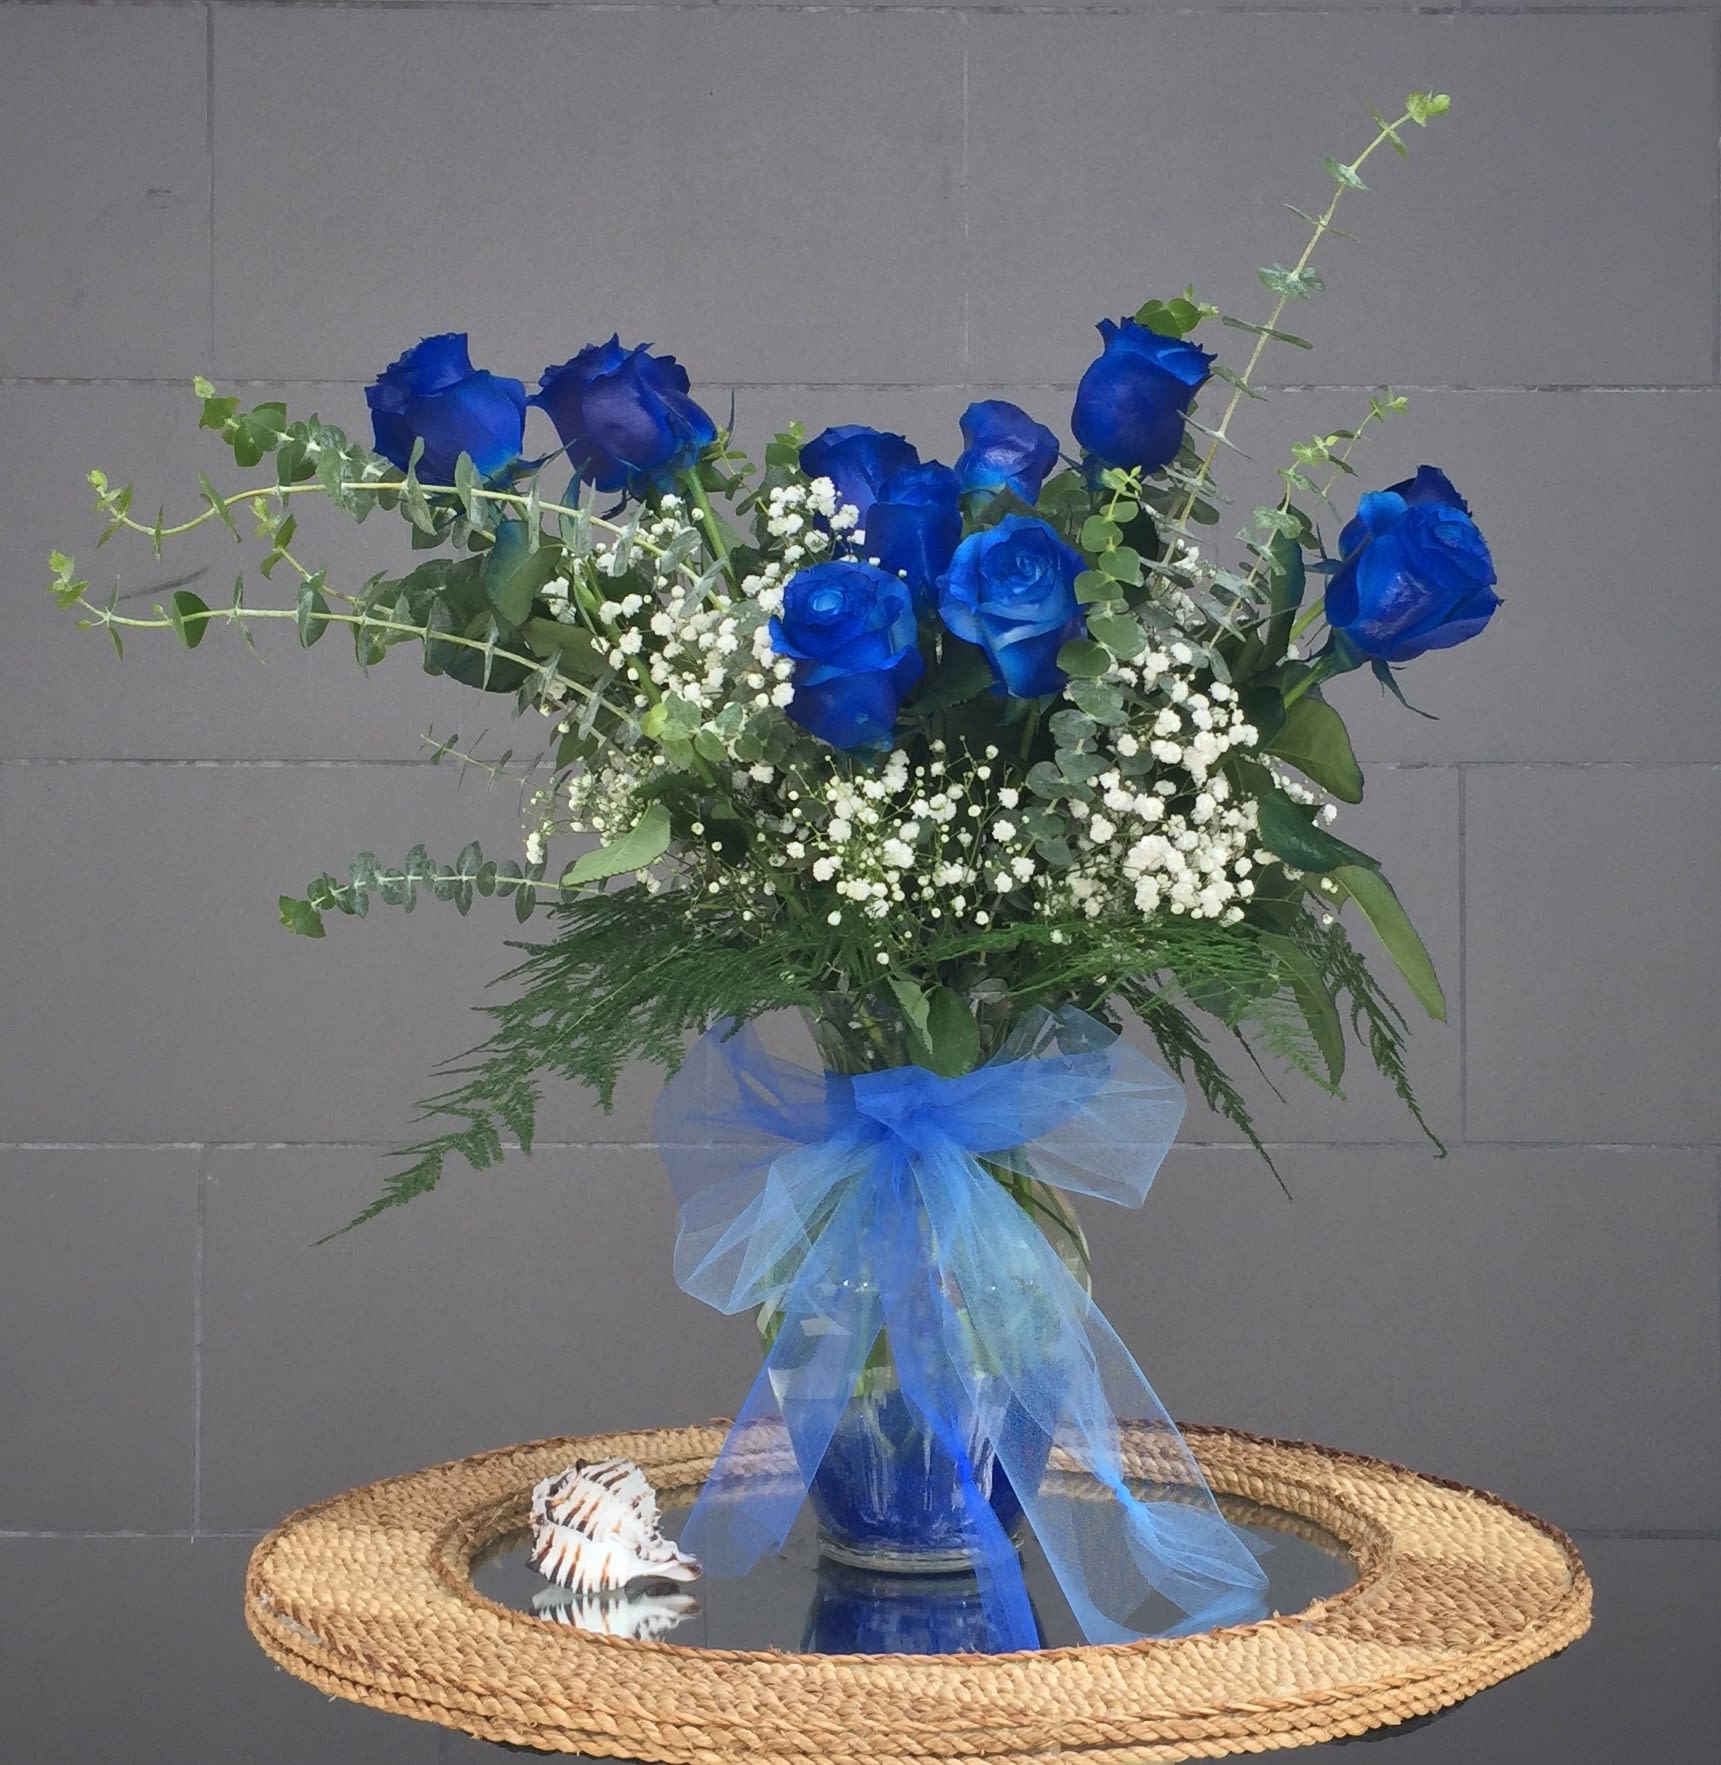 Nautica - Beautiful blue roses and nice accents in a tall glass vase. STANDARD AS SHOWN: 12 ROSES DELUXE: 24 ROSES PREMIUM: 36 ROSES